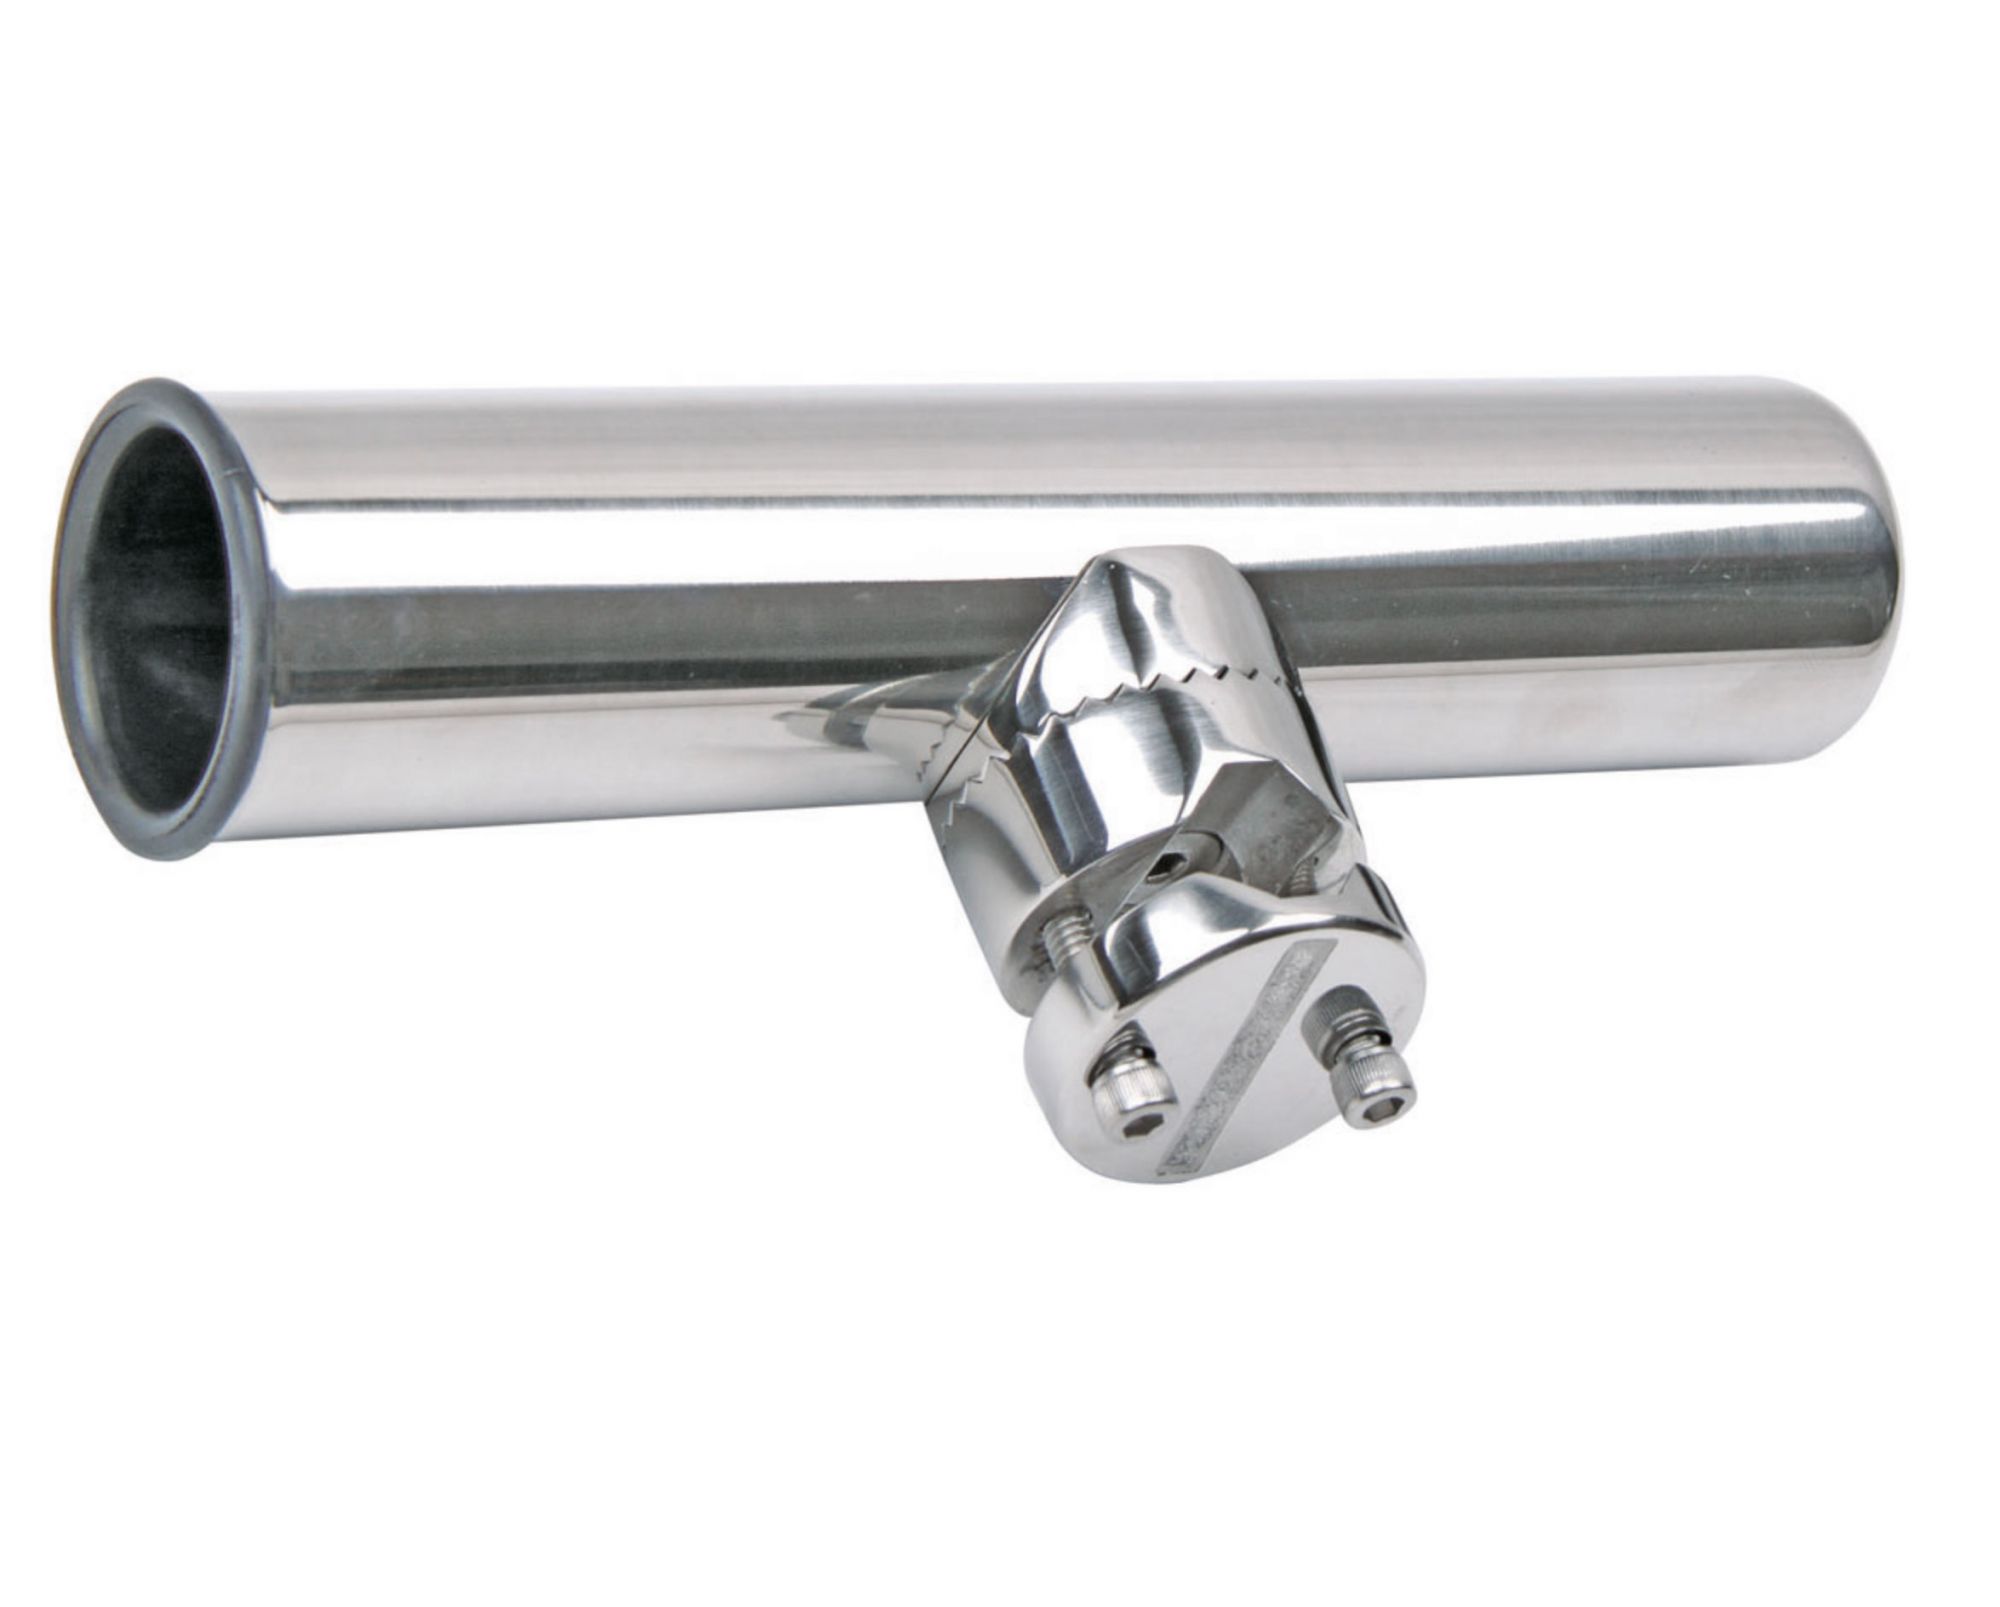 https://www.nautimarket-europe.com/open2b/var/products/173/30/0-f7eb6f55-2000-Stainless-steel-Fishing-rod-holder-for-guard-rail-22-25mm-N30413004991.jpg